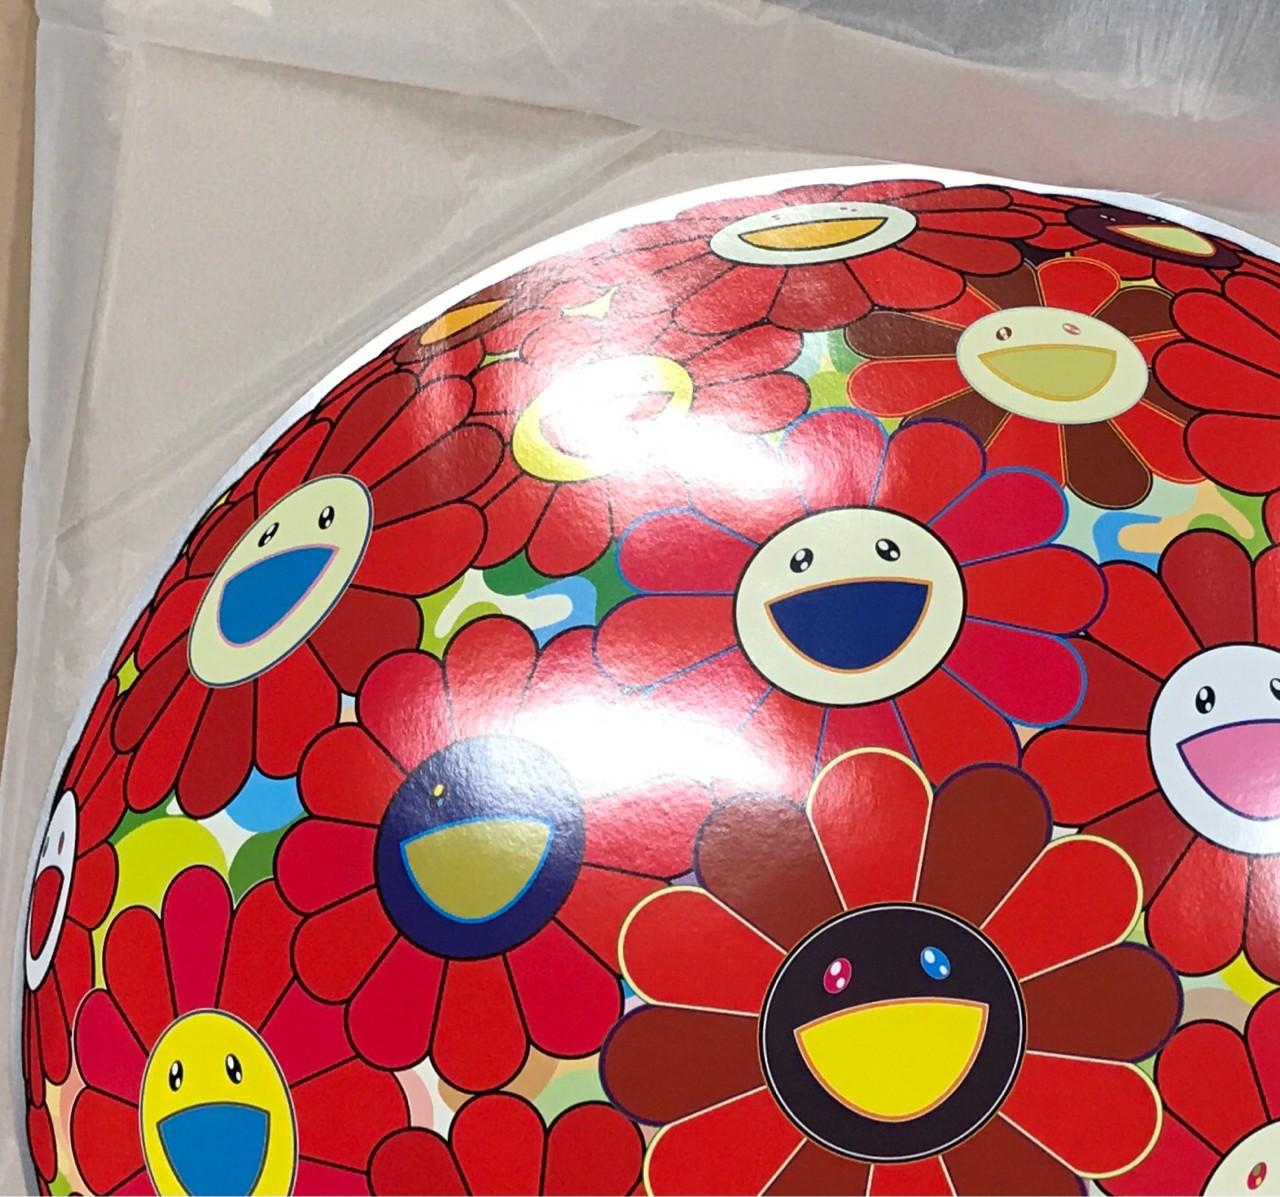 Red Flowerball (3D), 2013 by Takashi Murakami
Woven paper, four-color offset print, cold foil stamp, glossy varnish
Published by Kaikai Kiki Co., Ltd., Tokyo
28 in diameter
71 cm diameter
Edition 134/300

Takashi Murakami is best known for his